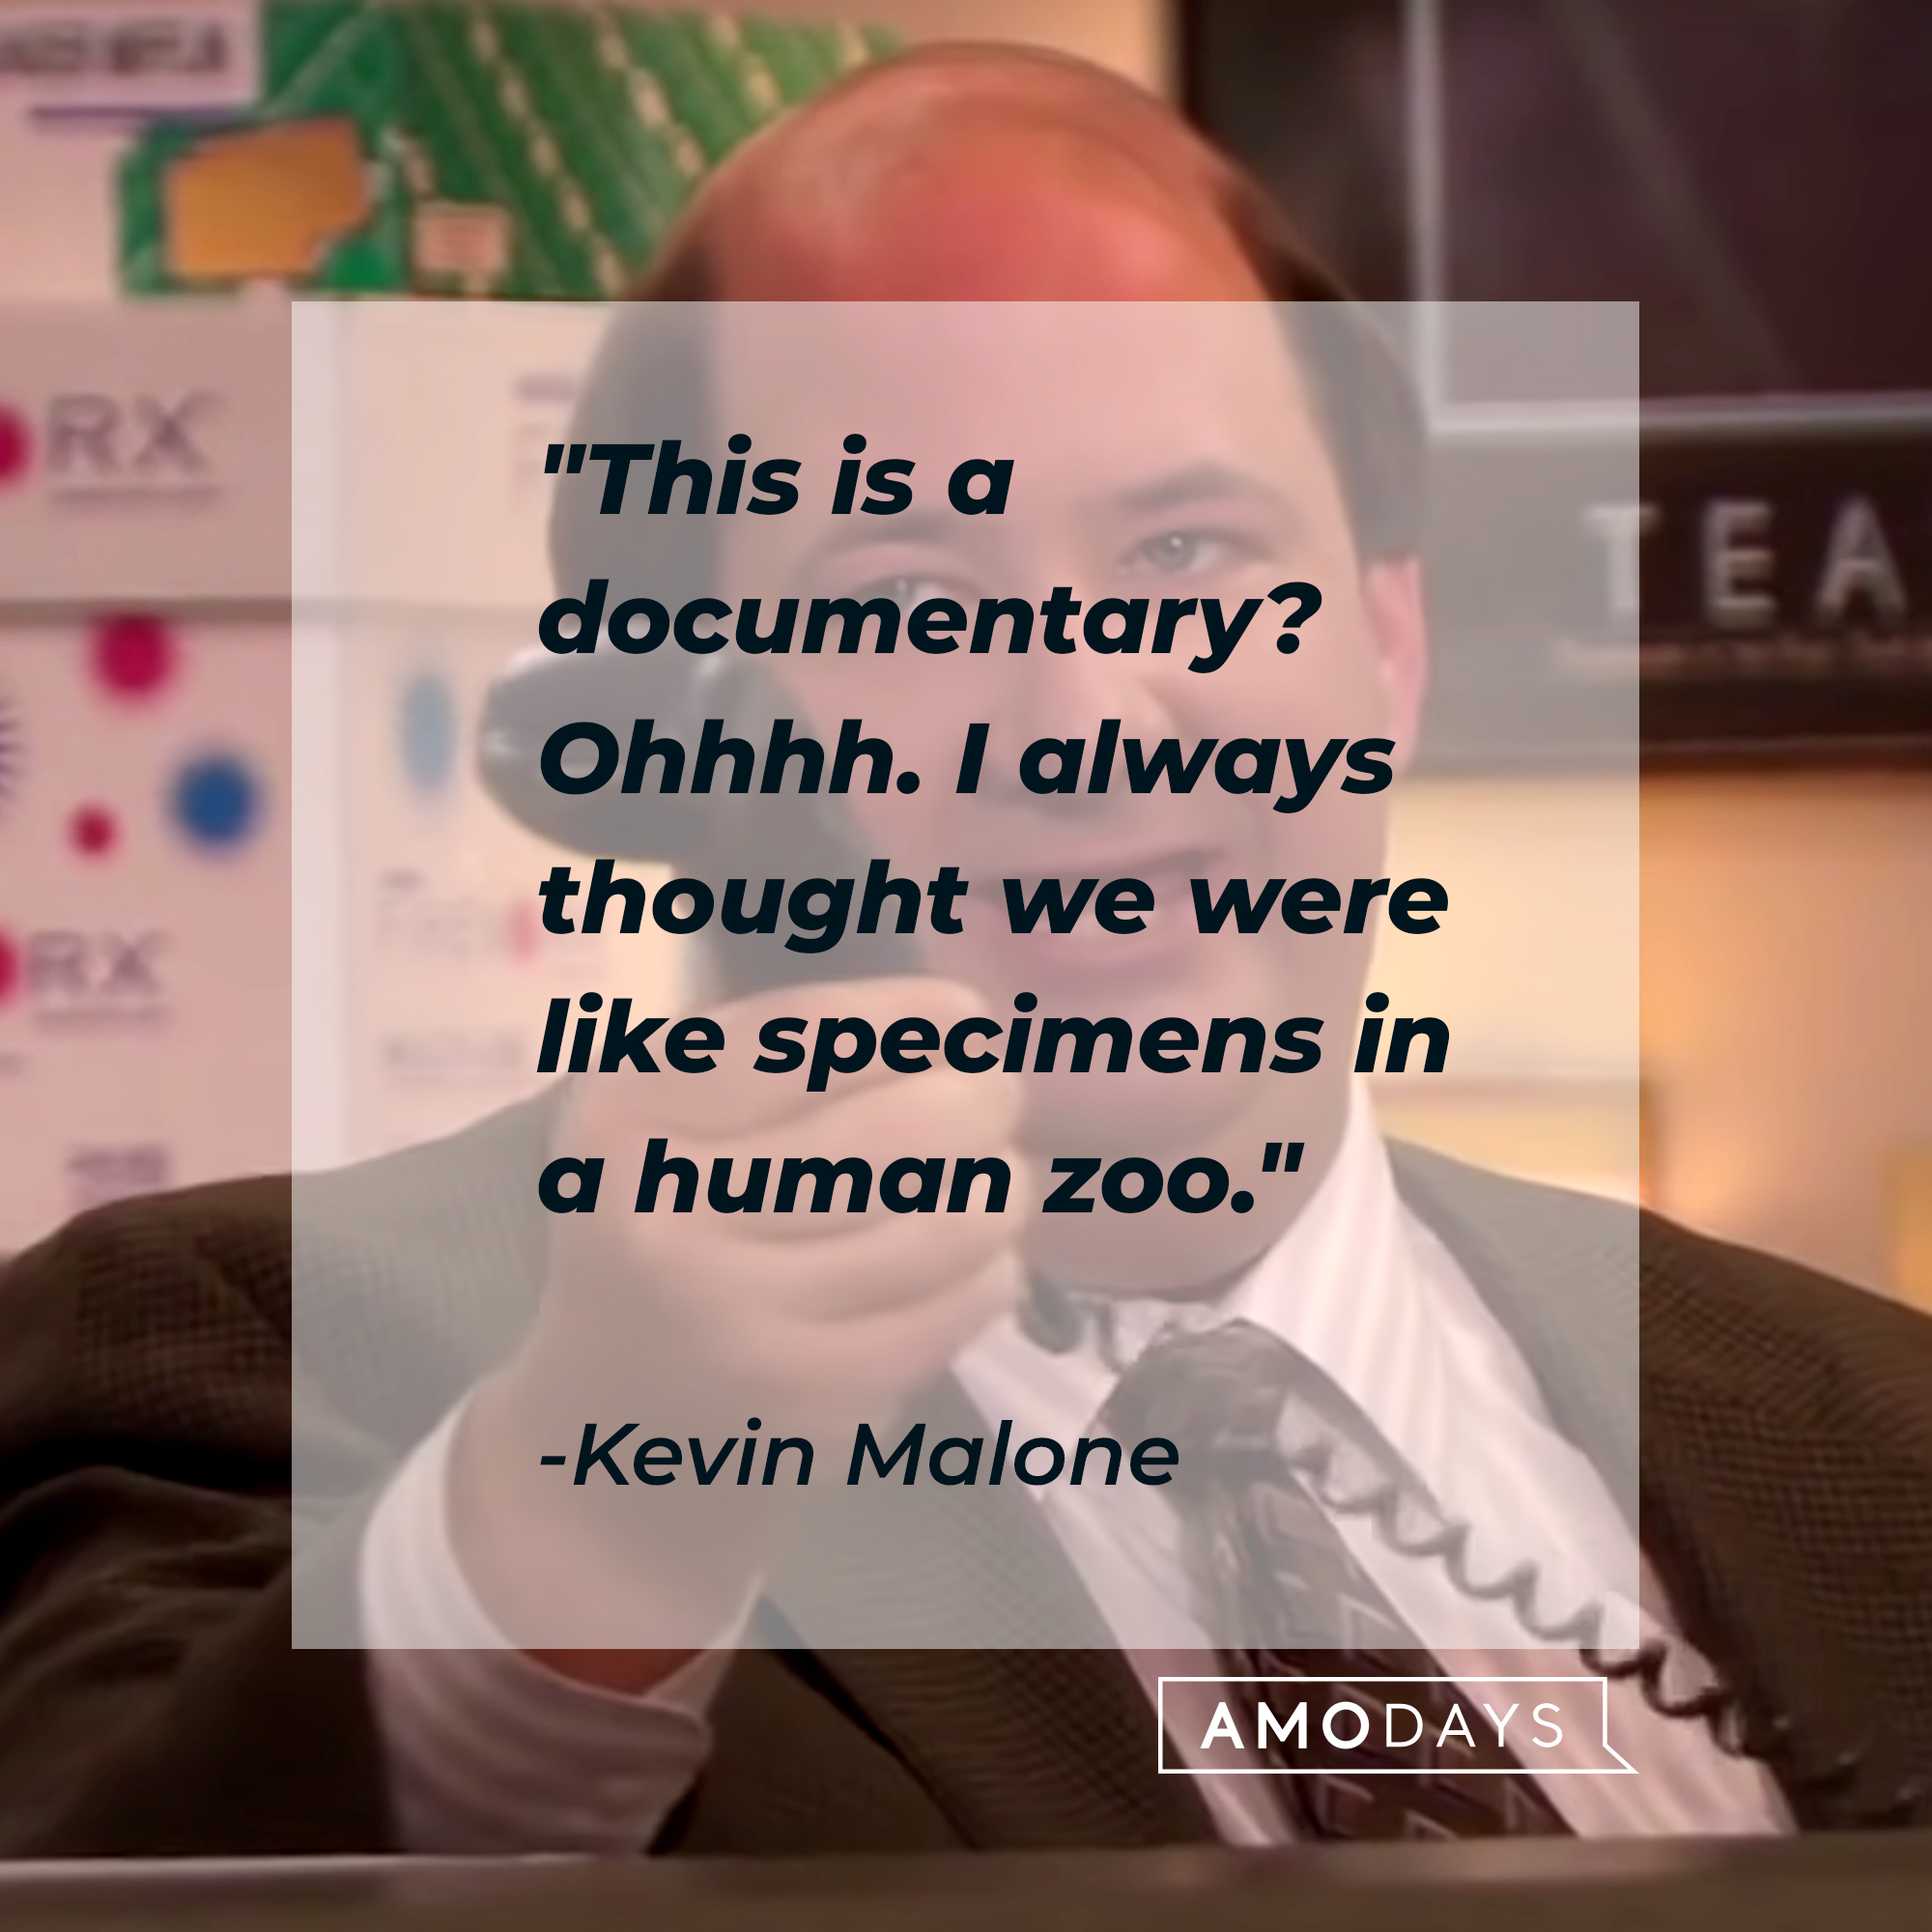 Kevin Malone's quote: "This is a documentary? Ohhhh. I always thought we were like specimens in a human zoo." | Source: youtube.com/TheOffice